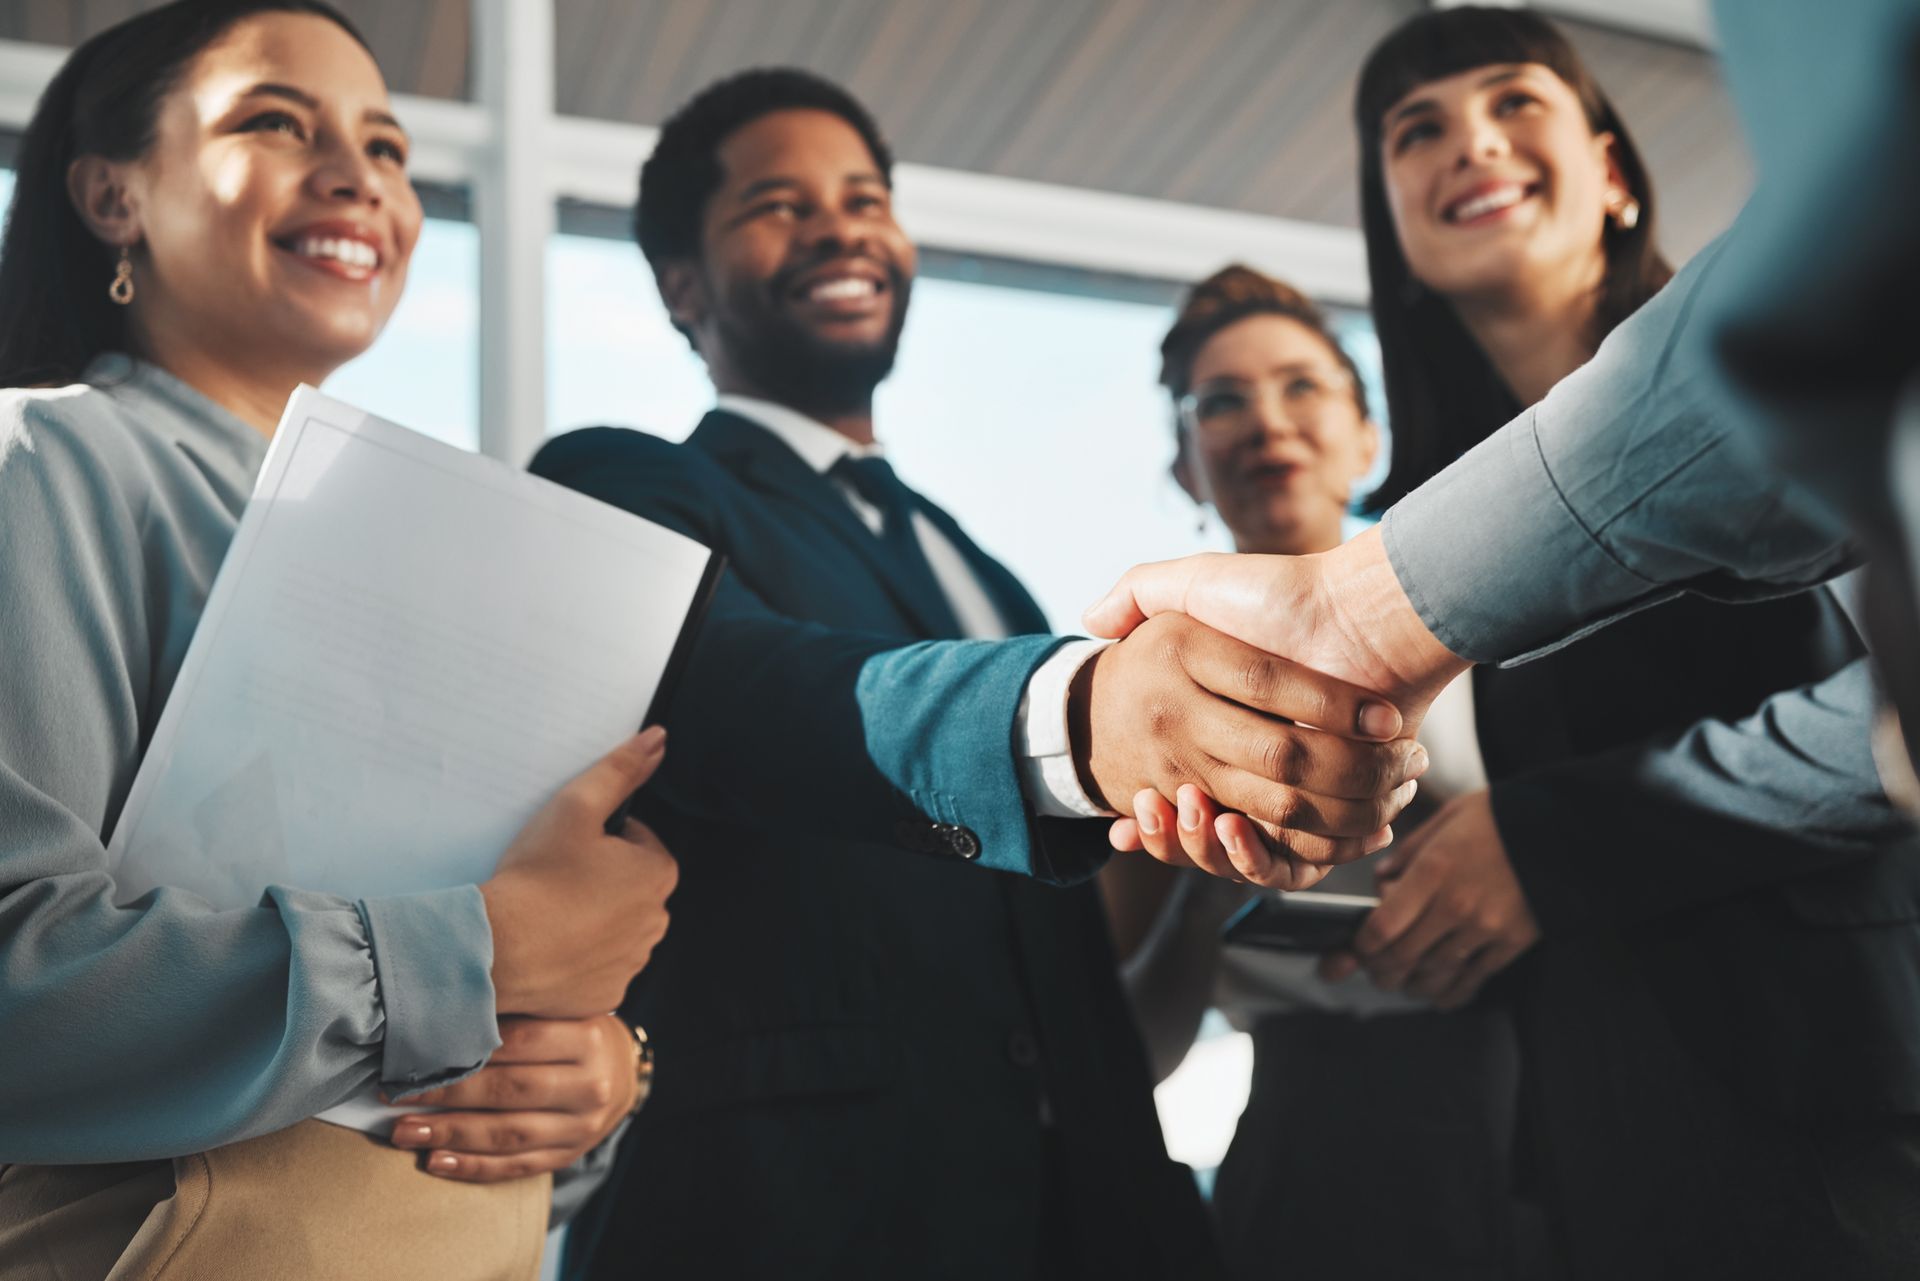 A group of Notaries are shaking hands at a Networking event.